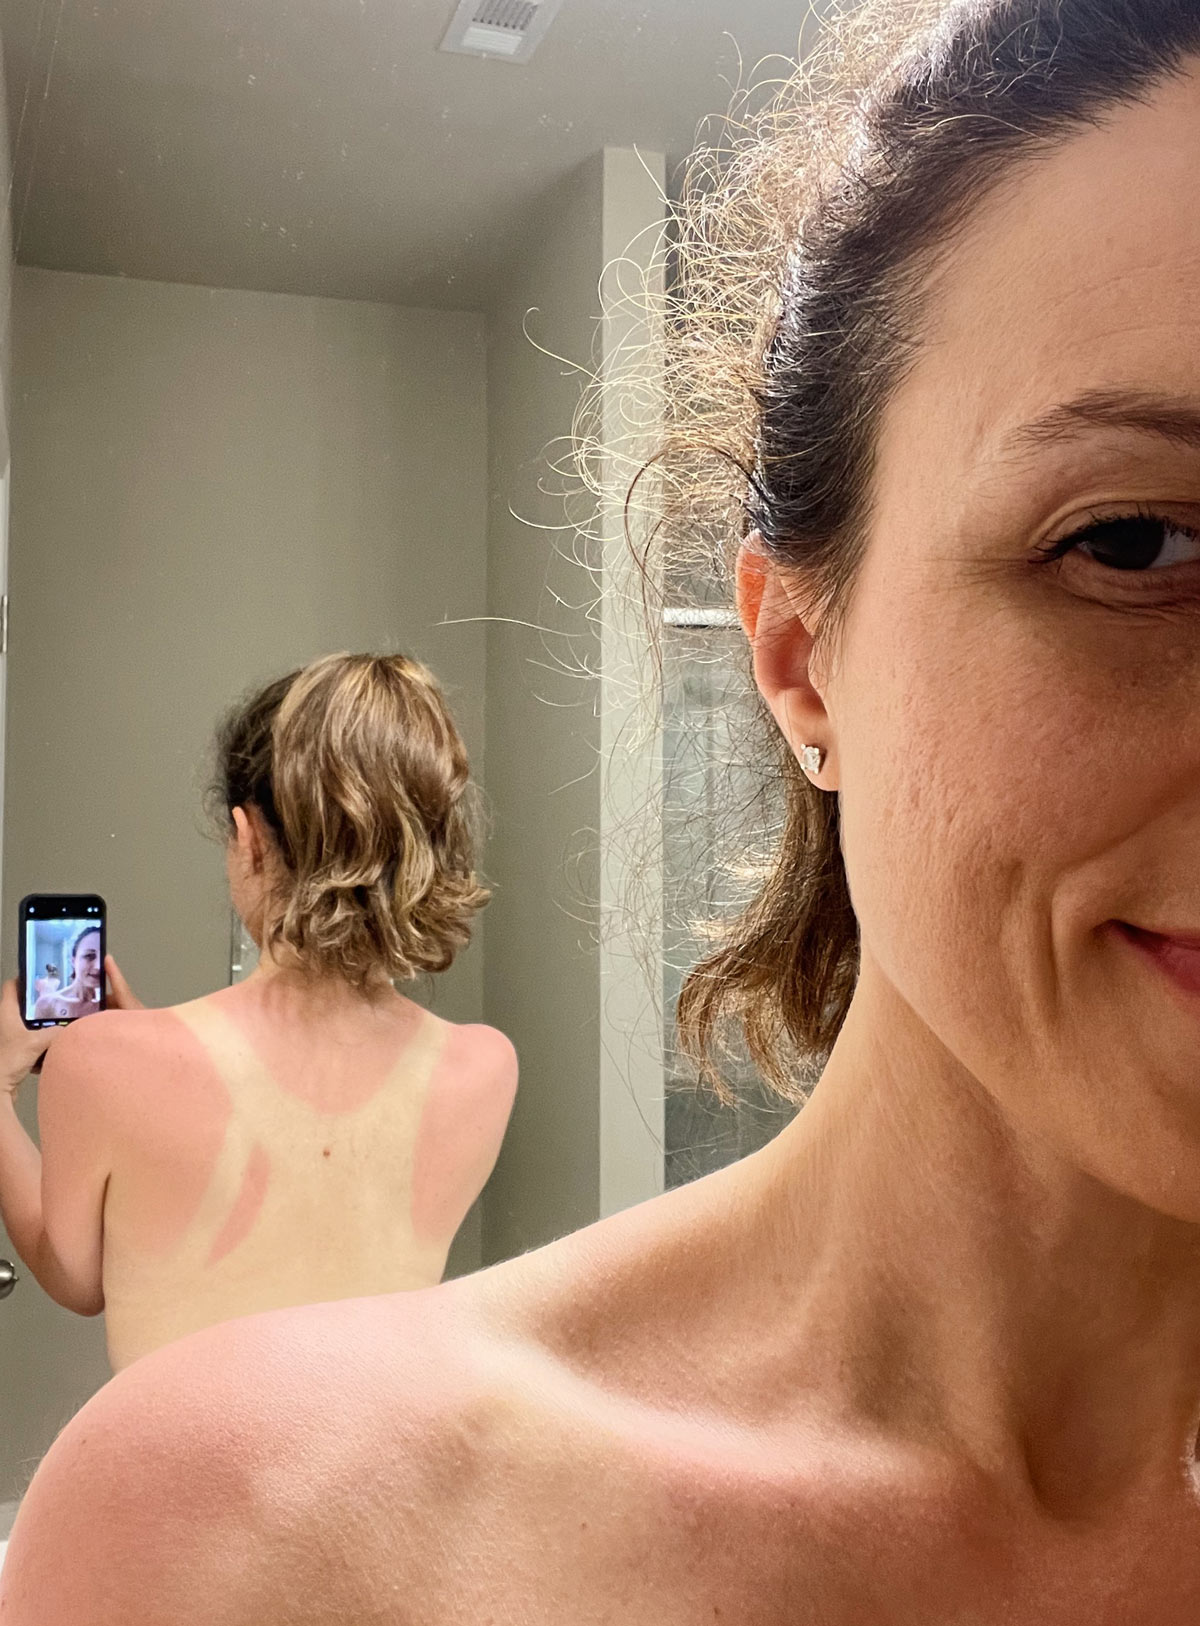 Aysegul taking a photo of her sunburnt back with her phone